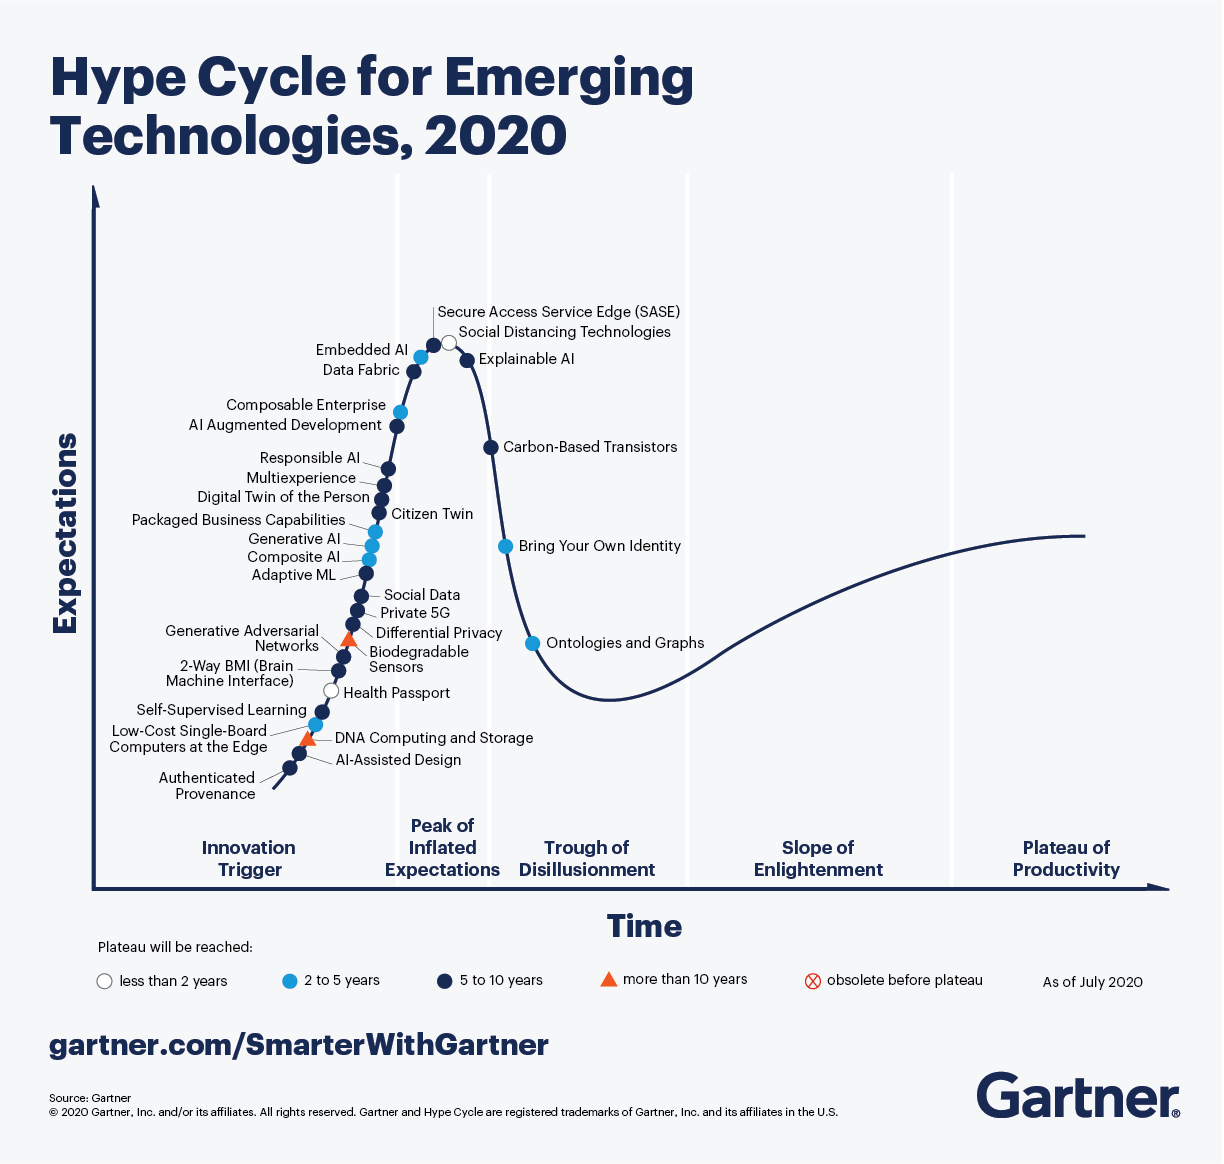 5 Trends Drive the Gartner Hype Cycle for Emerging Technologies, 2020